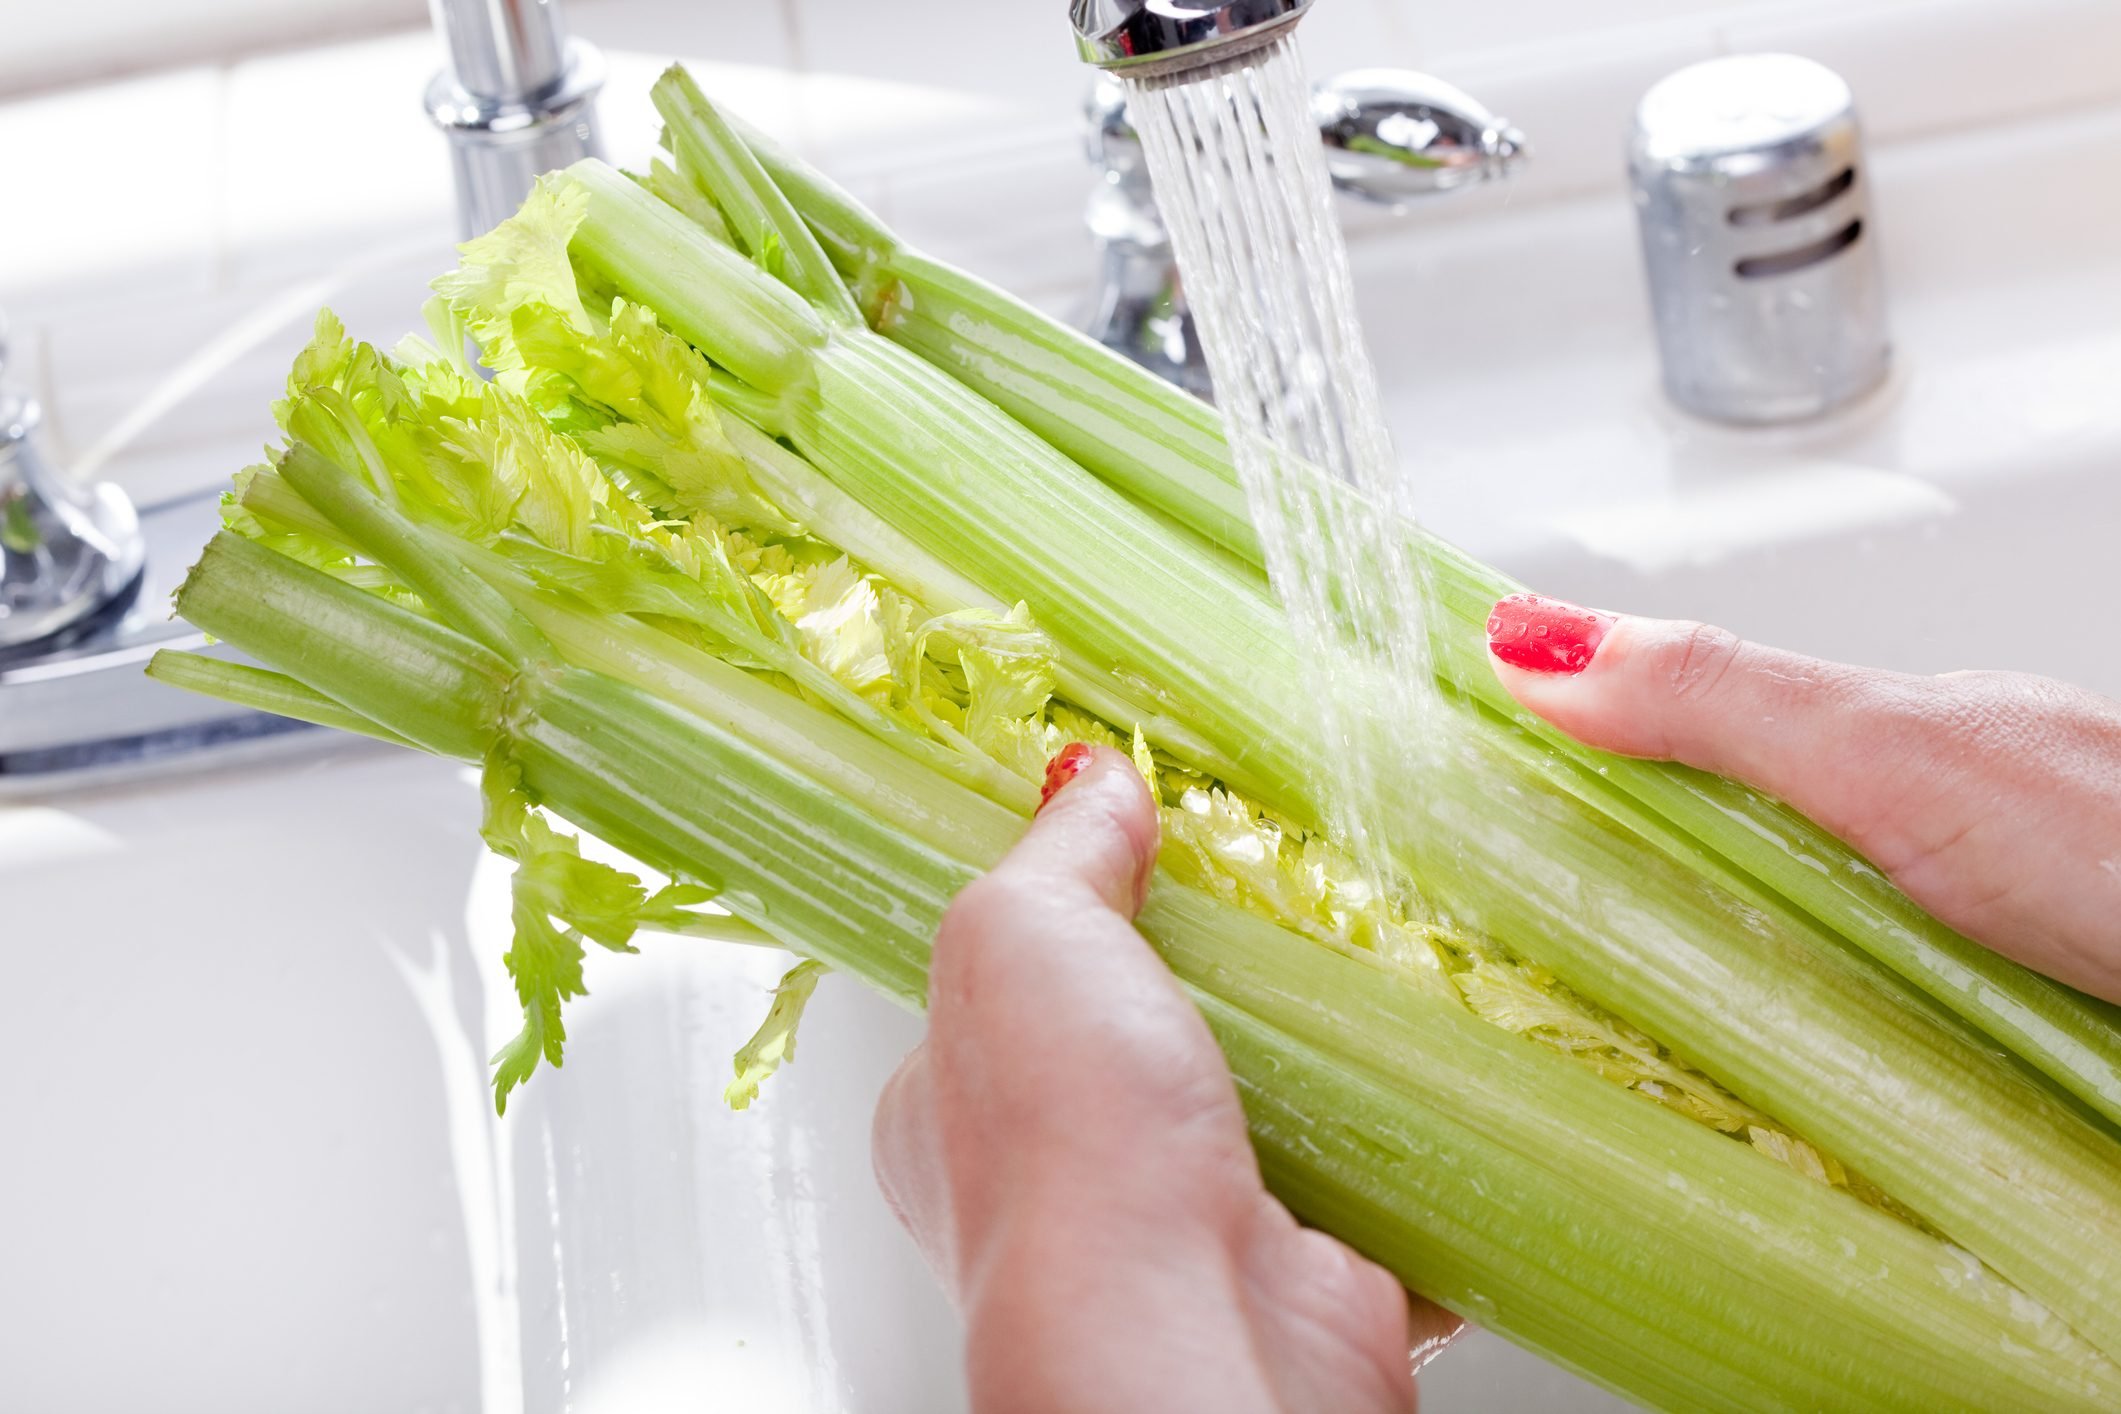 How to Wash Produce — Should You Wash Fruits and Vegetables with Soap?, Food Network Healthy Eats: Recipes, Ideas, and Food News